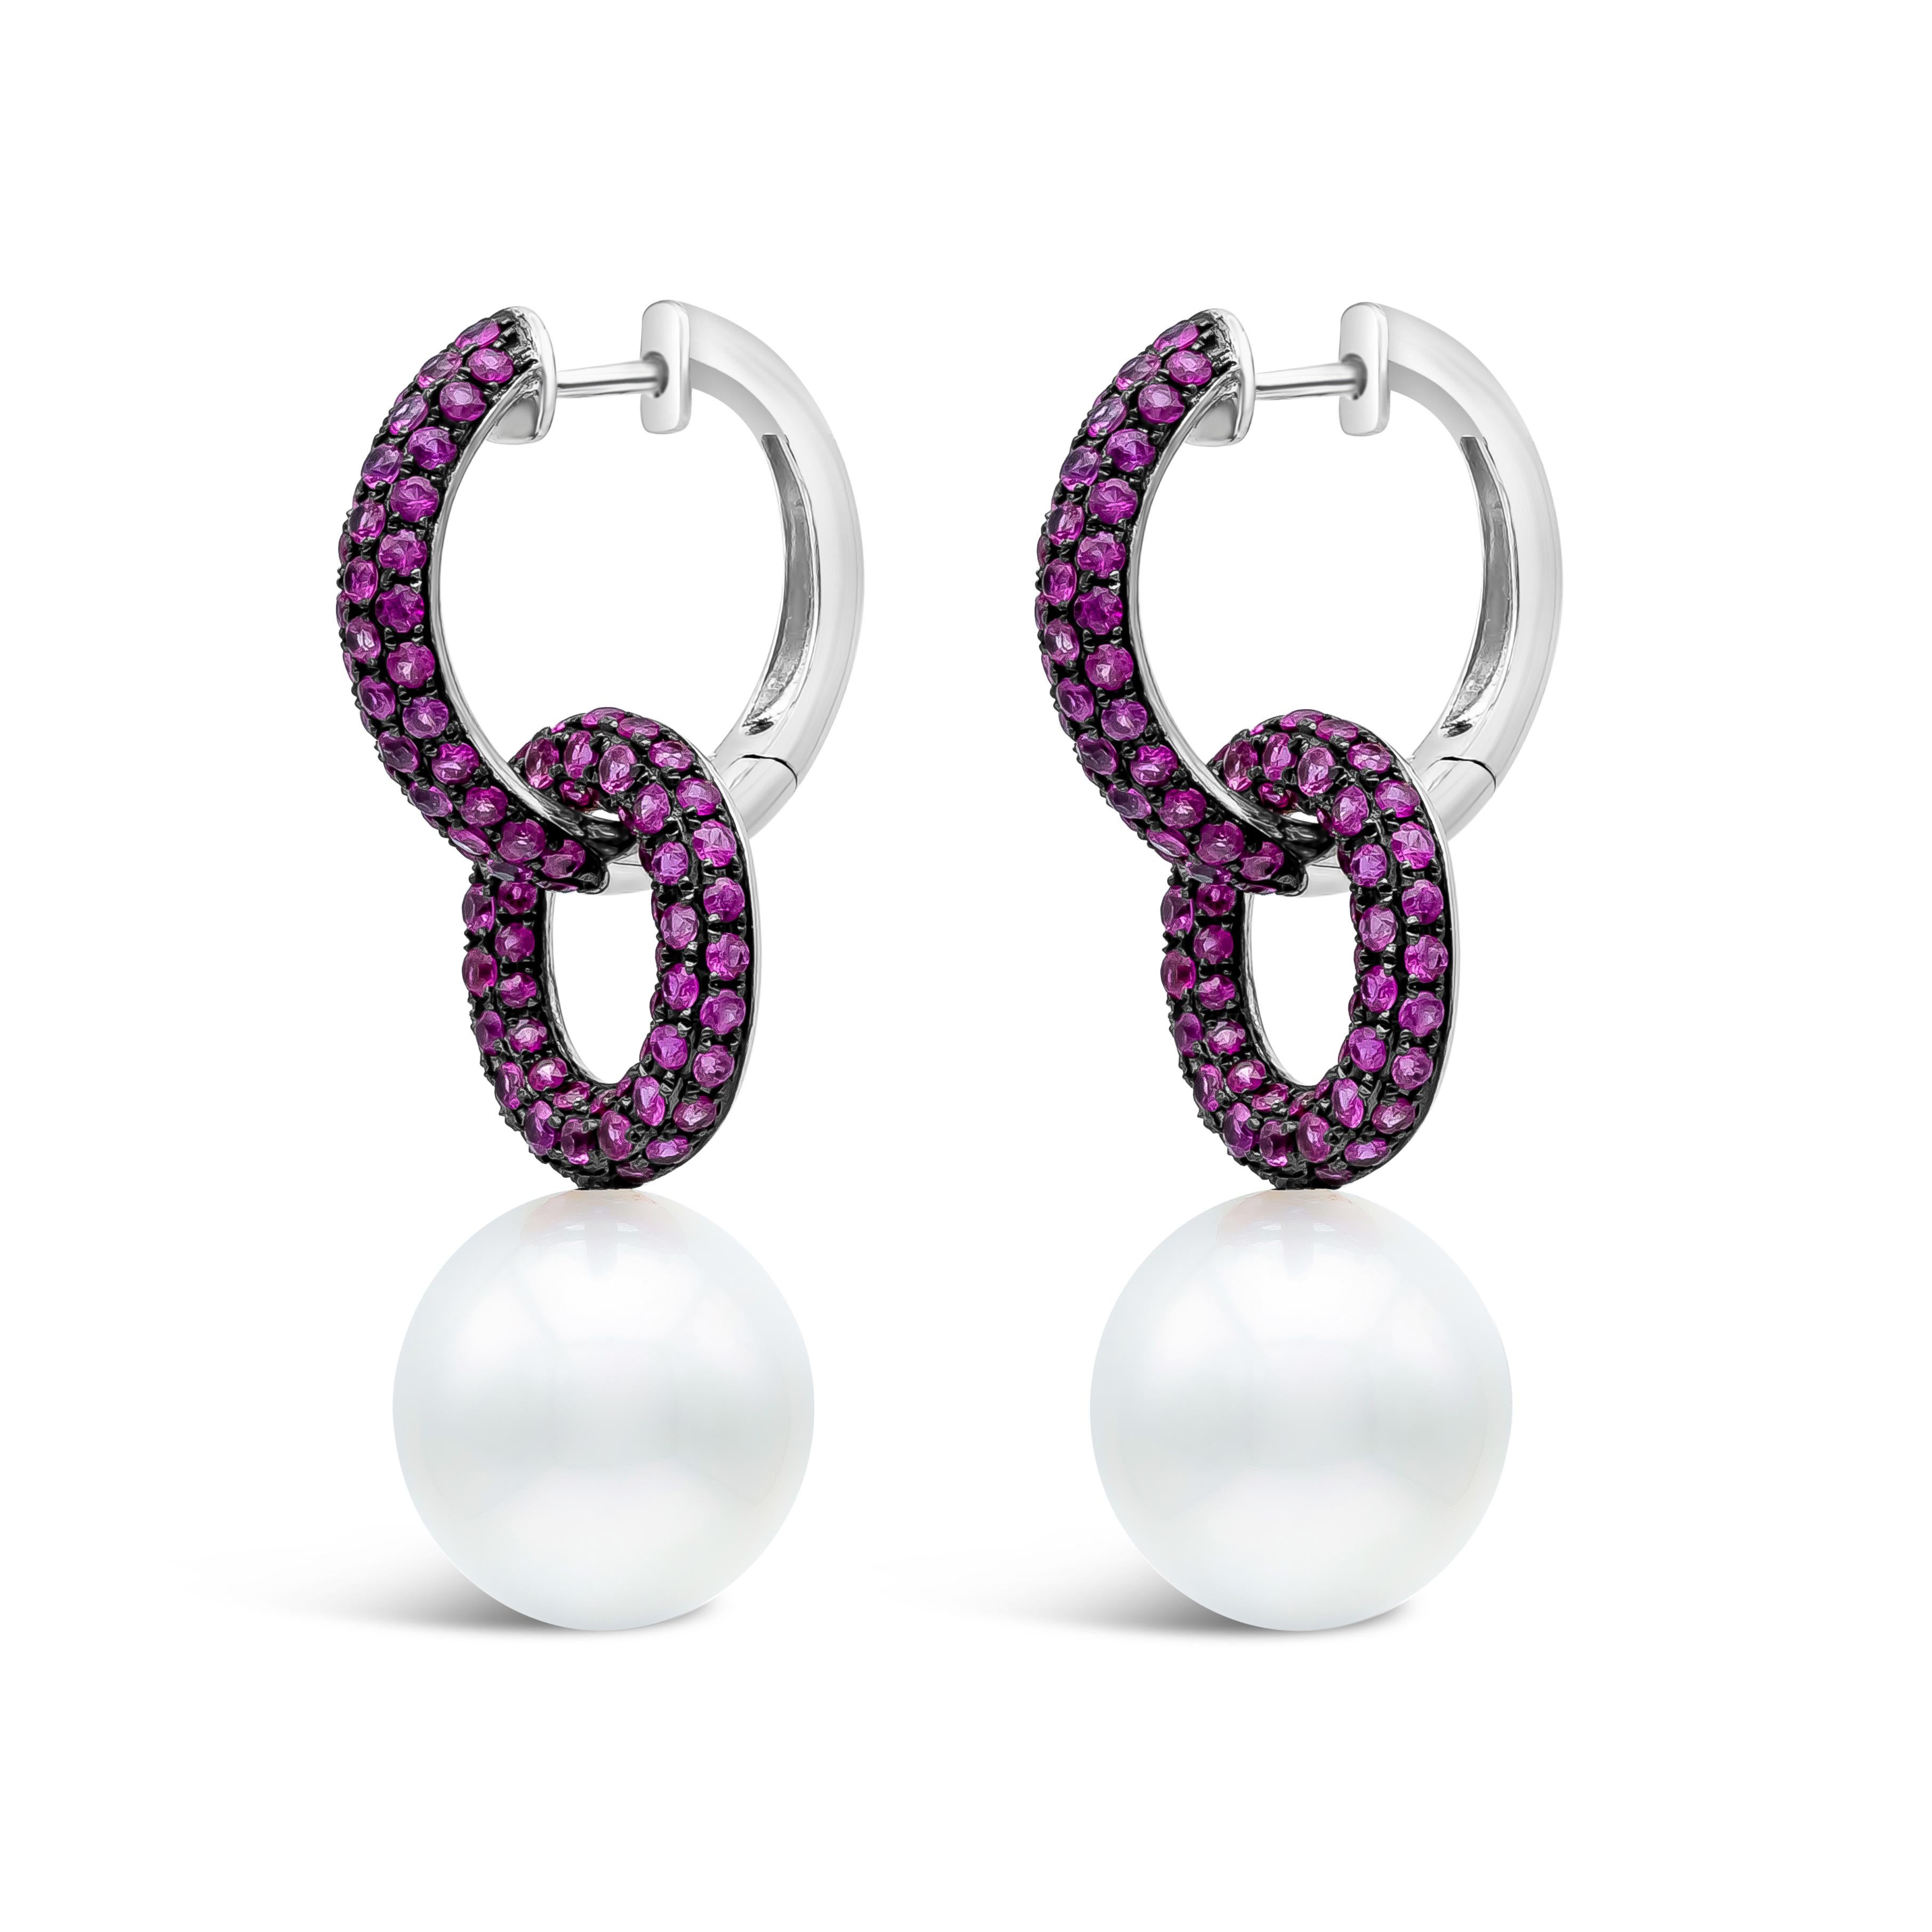 This uniquely designed double hoop link earrings is showcasing 12-13mm South Sea Pearls. It has 192 pieces of pink sapphires weighing 2.70 carats total. Upper Hoops are elegantly detachable and can wear as a single hoop earrings. Made with 18K White